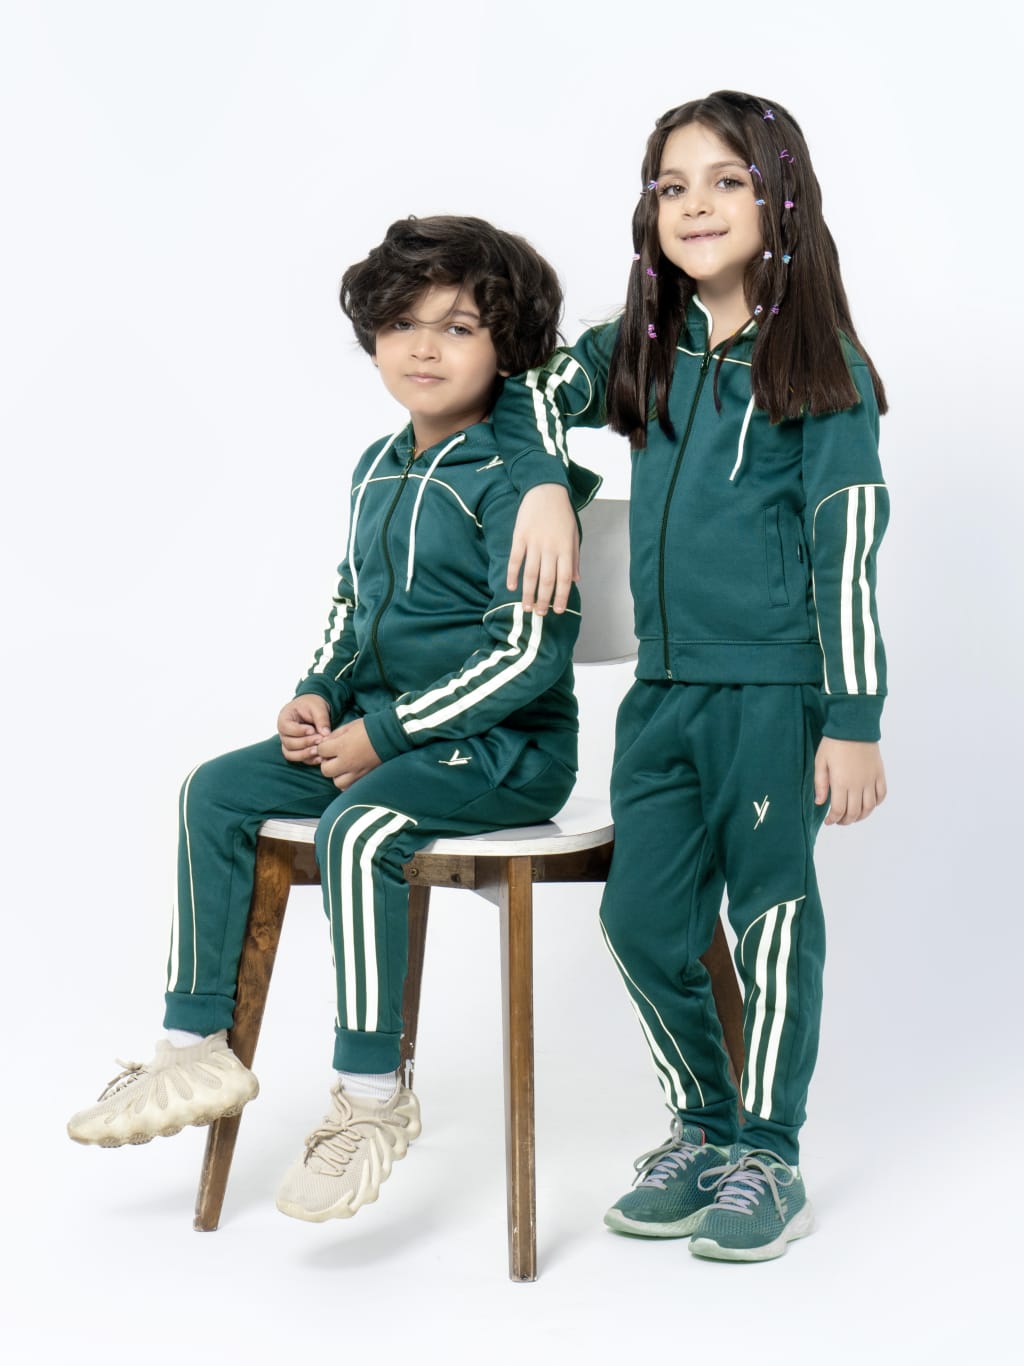 Hooded Tracksuit For Boys & Girls, Poly Athletic Fleece #VWT05-D